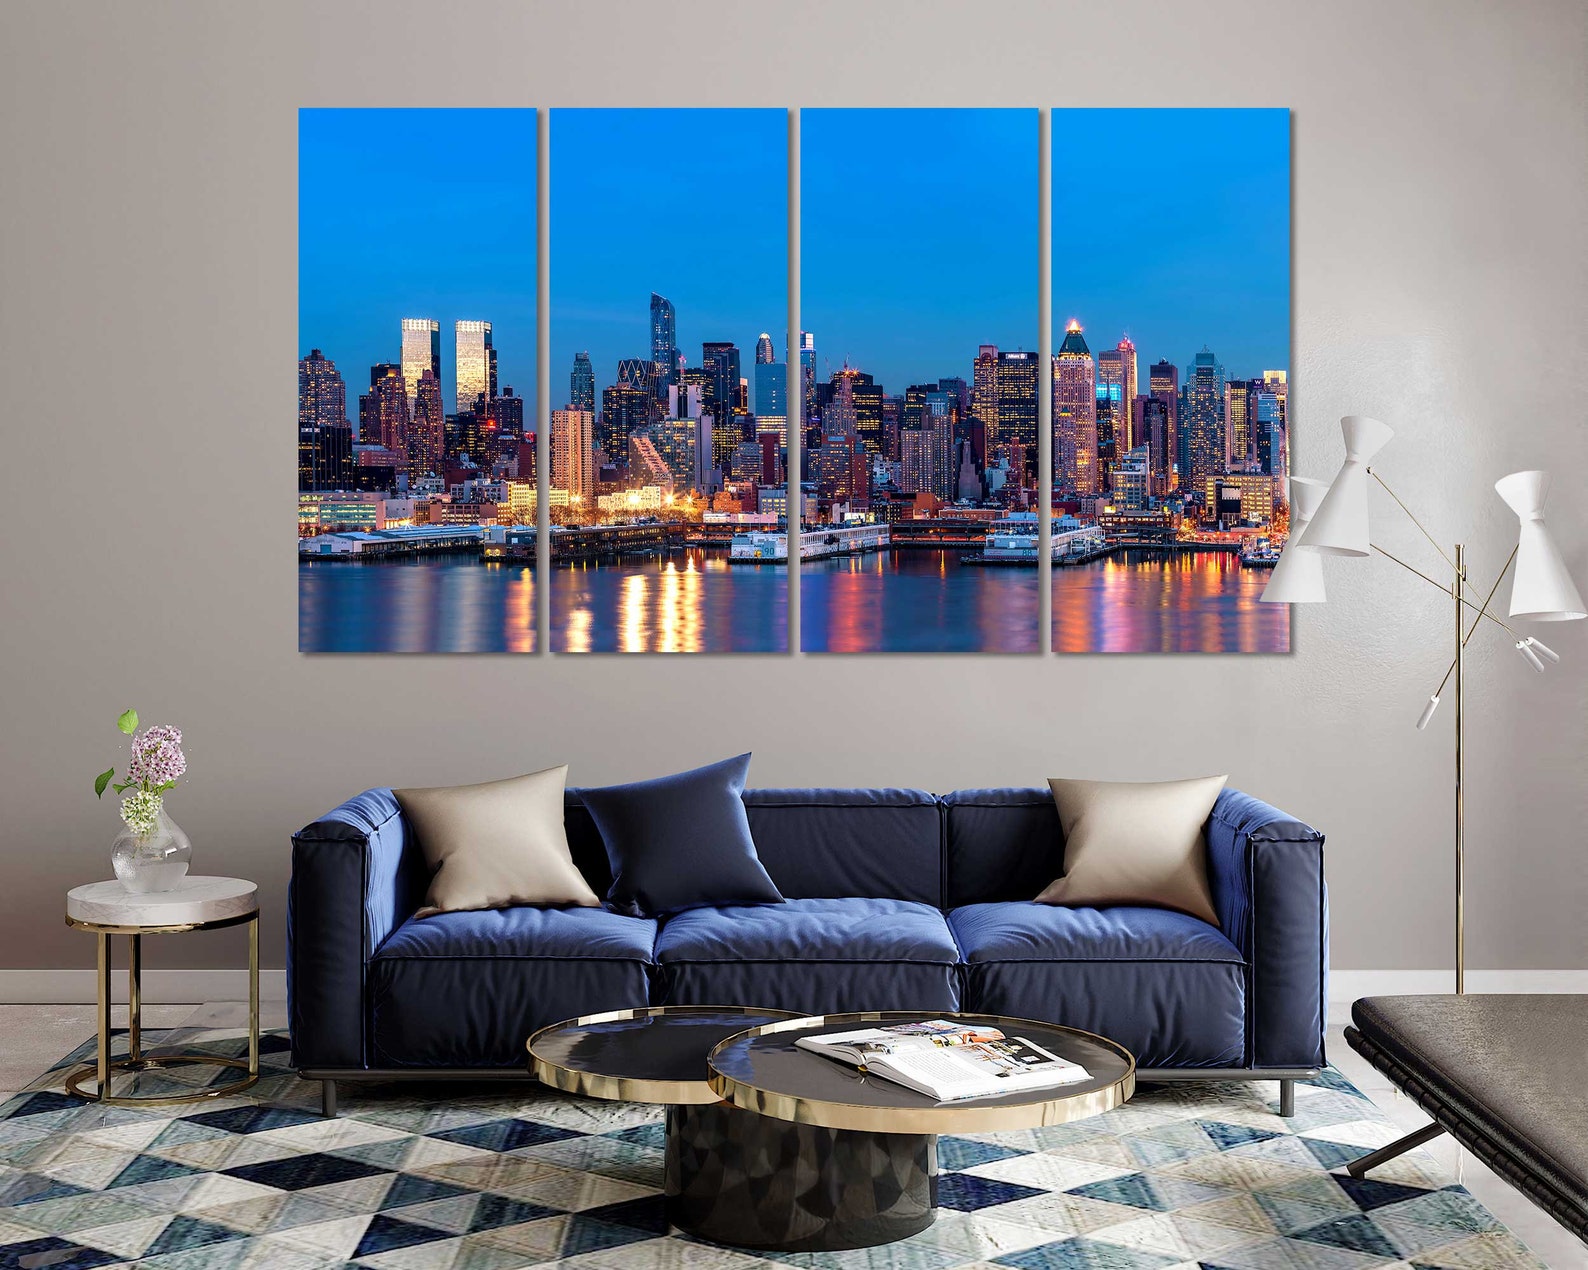 New York City Harbor Pictures Art Wall New York at Dusk - Etsy